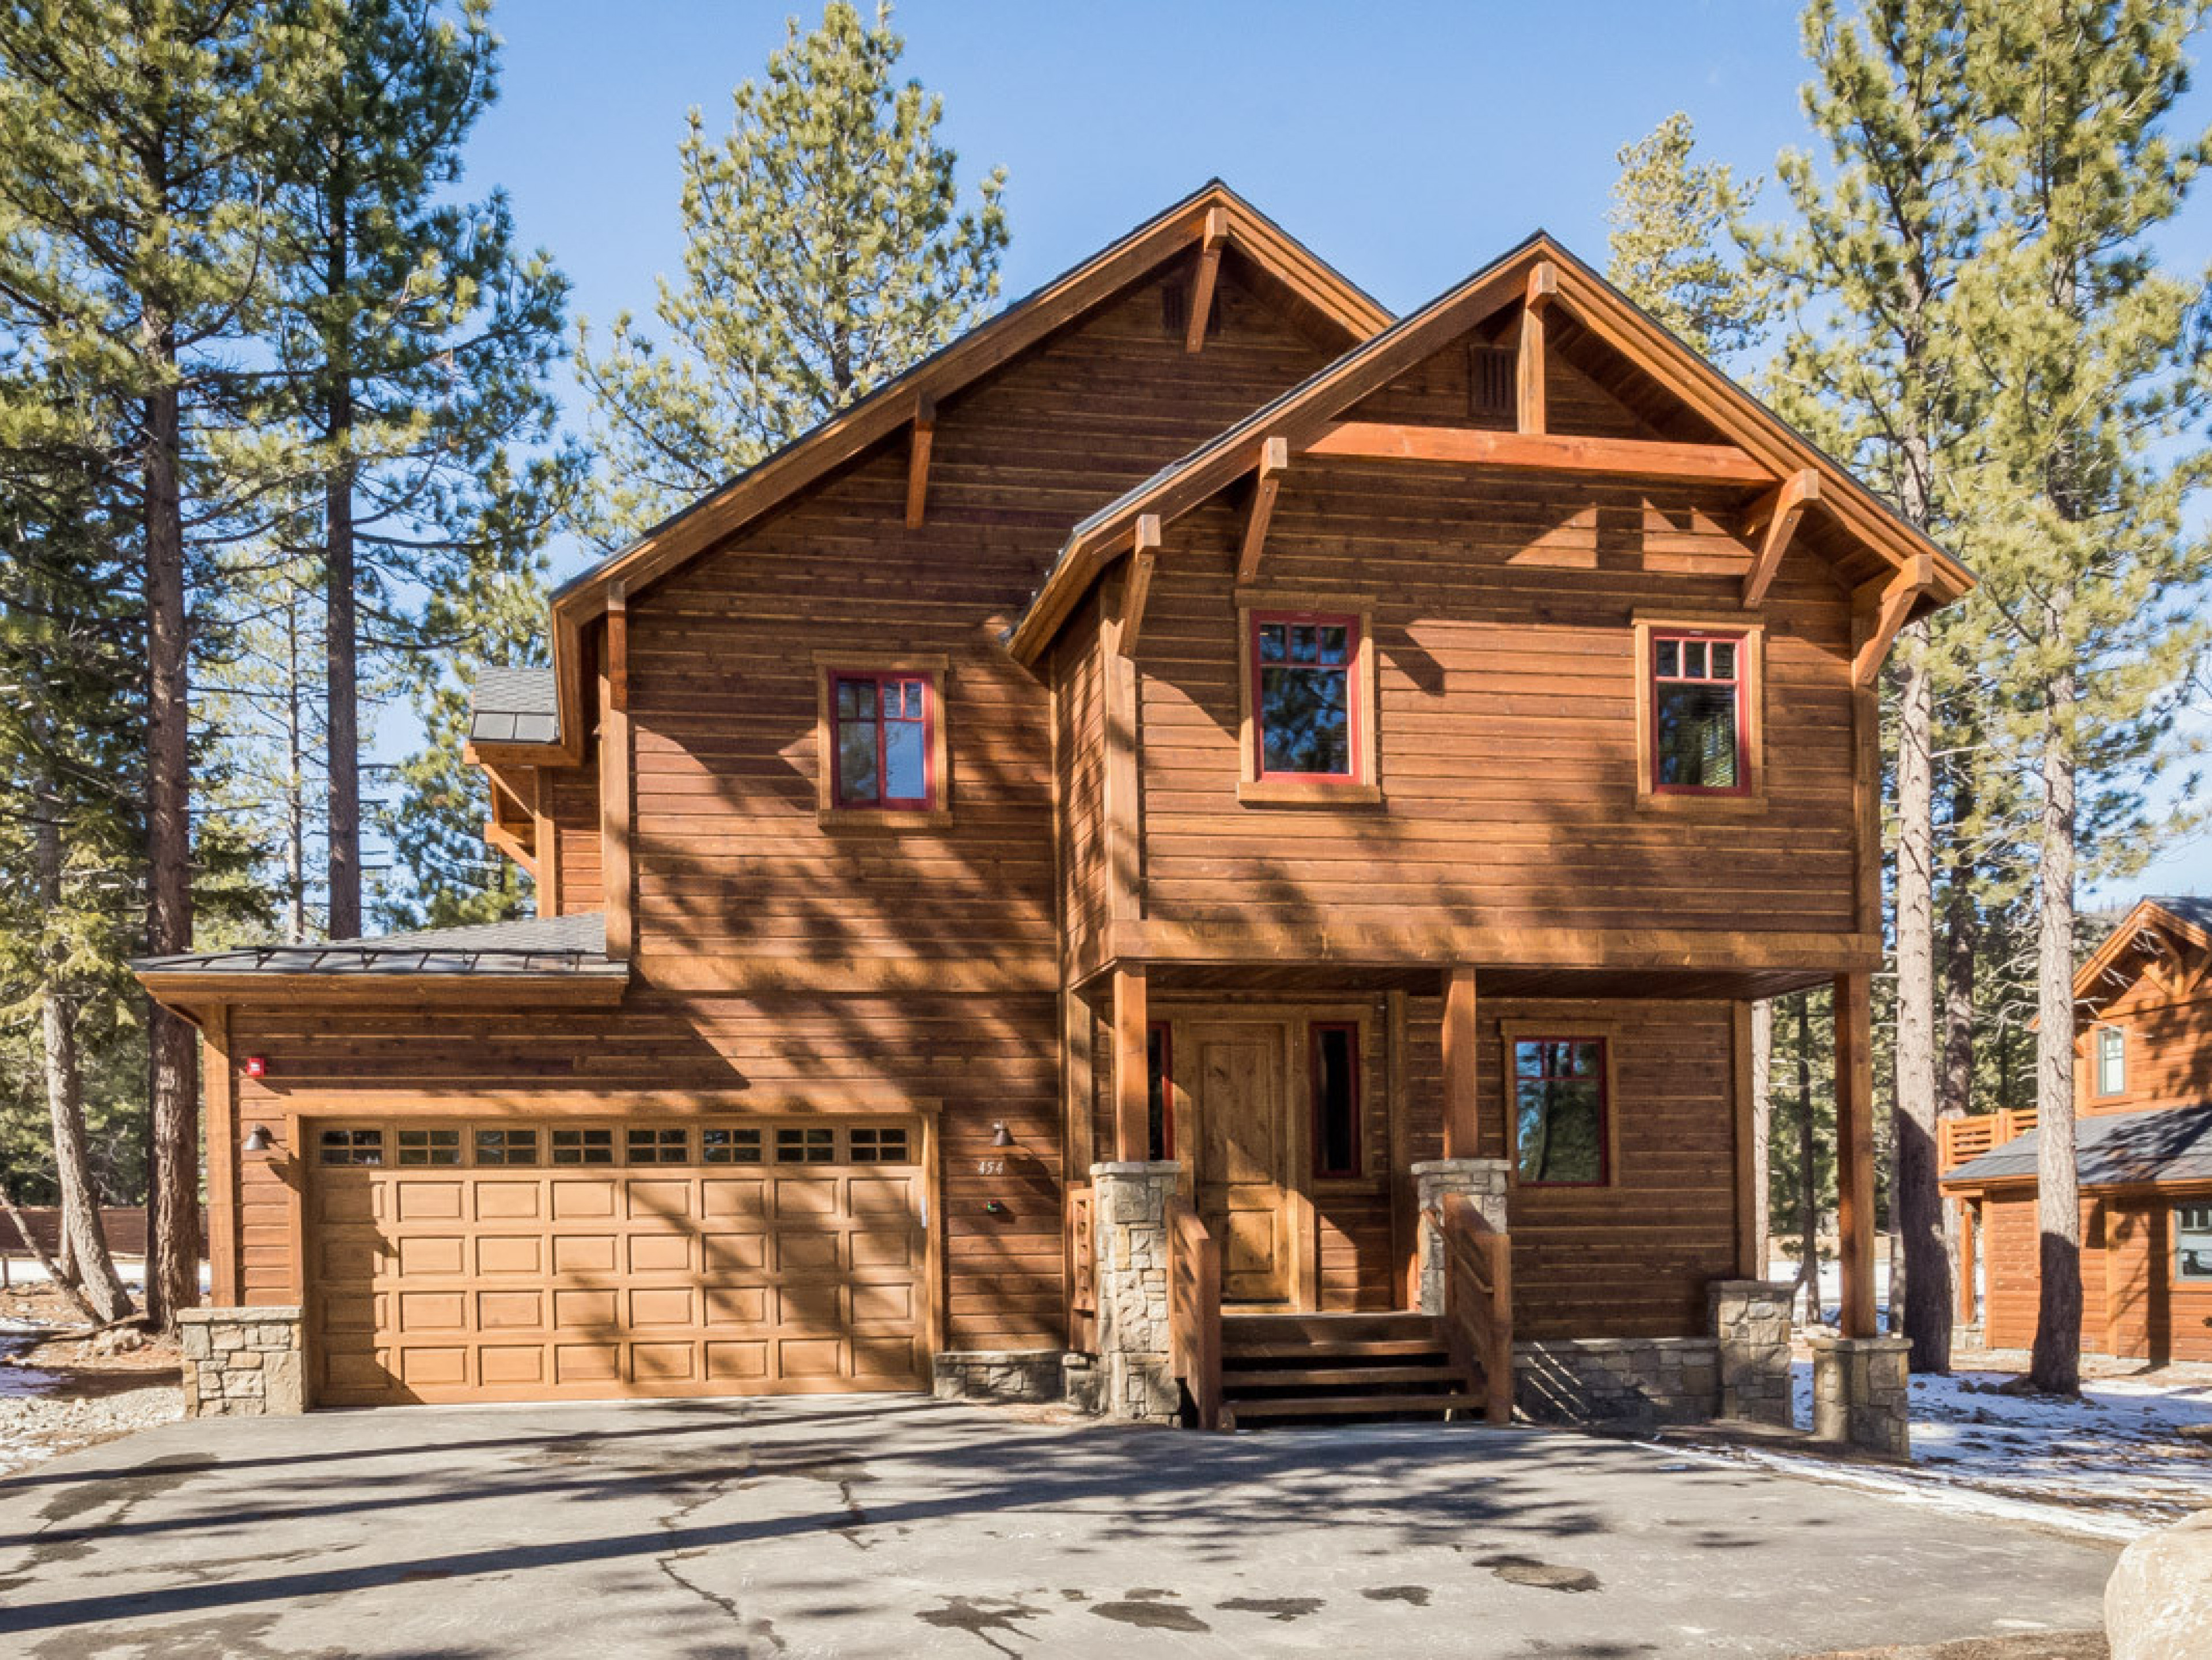 Mammoth Lakes 2 - cabins for October half term 